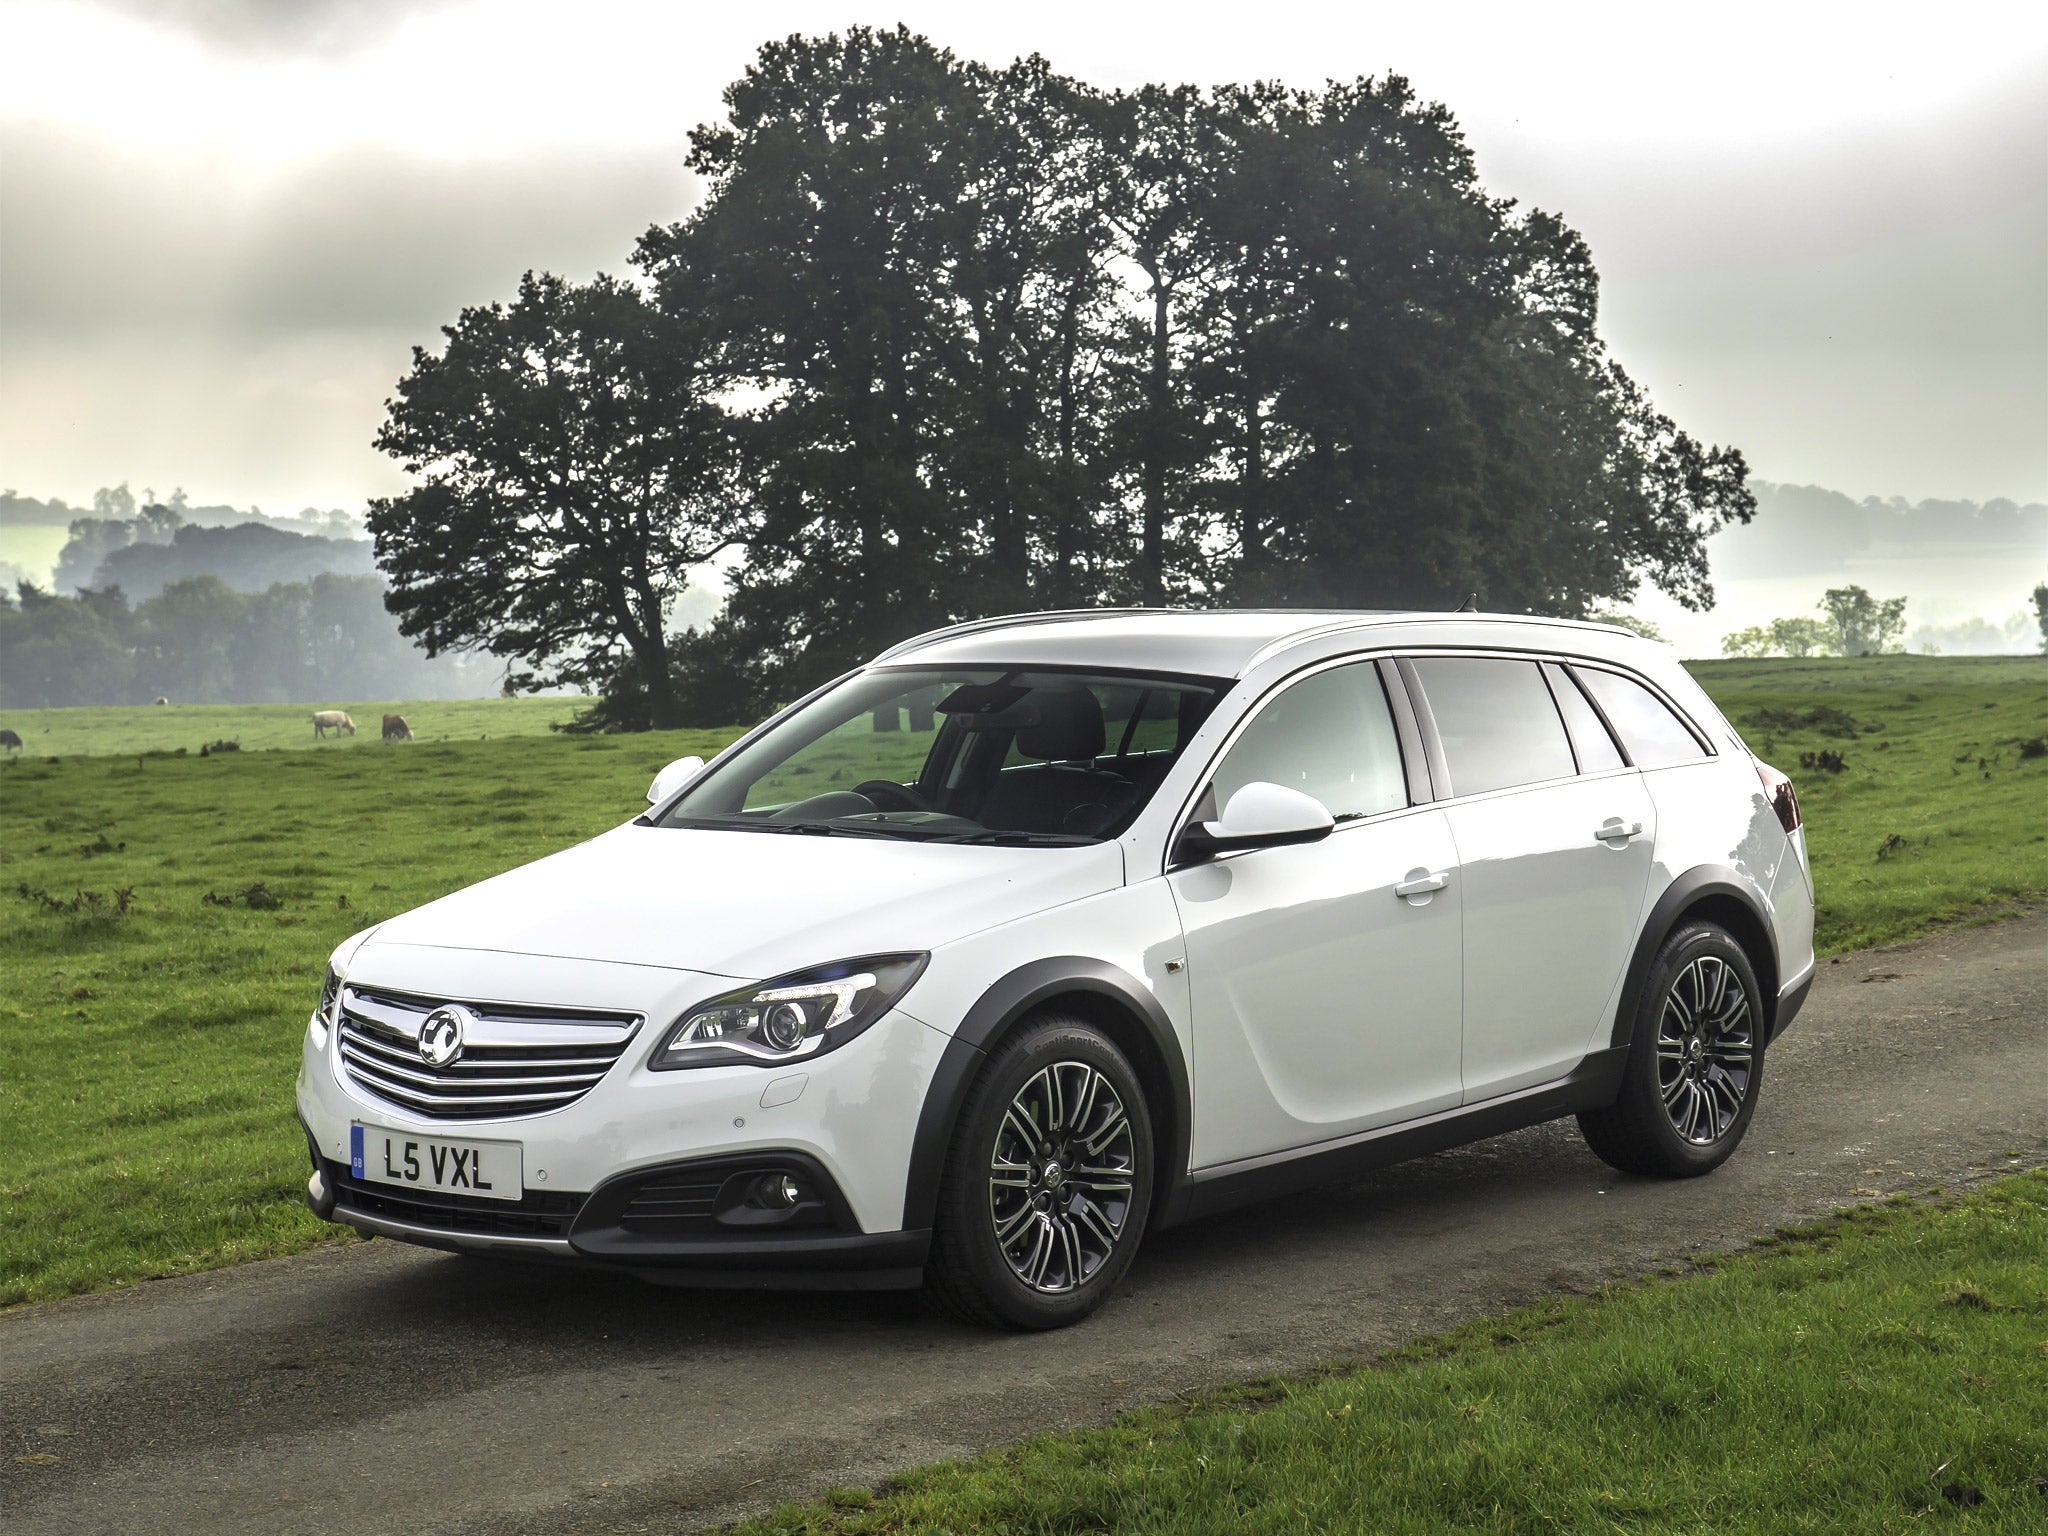 Muscular styling: the Vauxhall Insignia Country Tourer